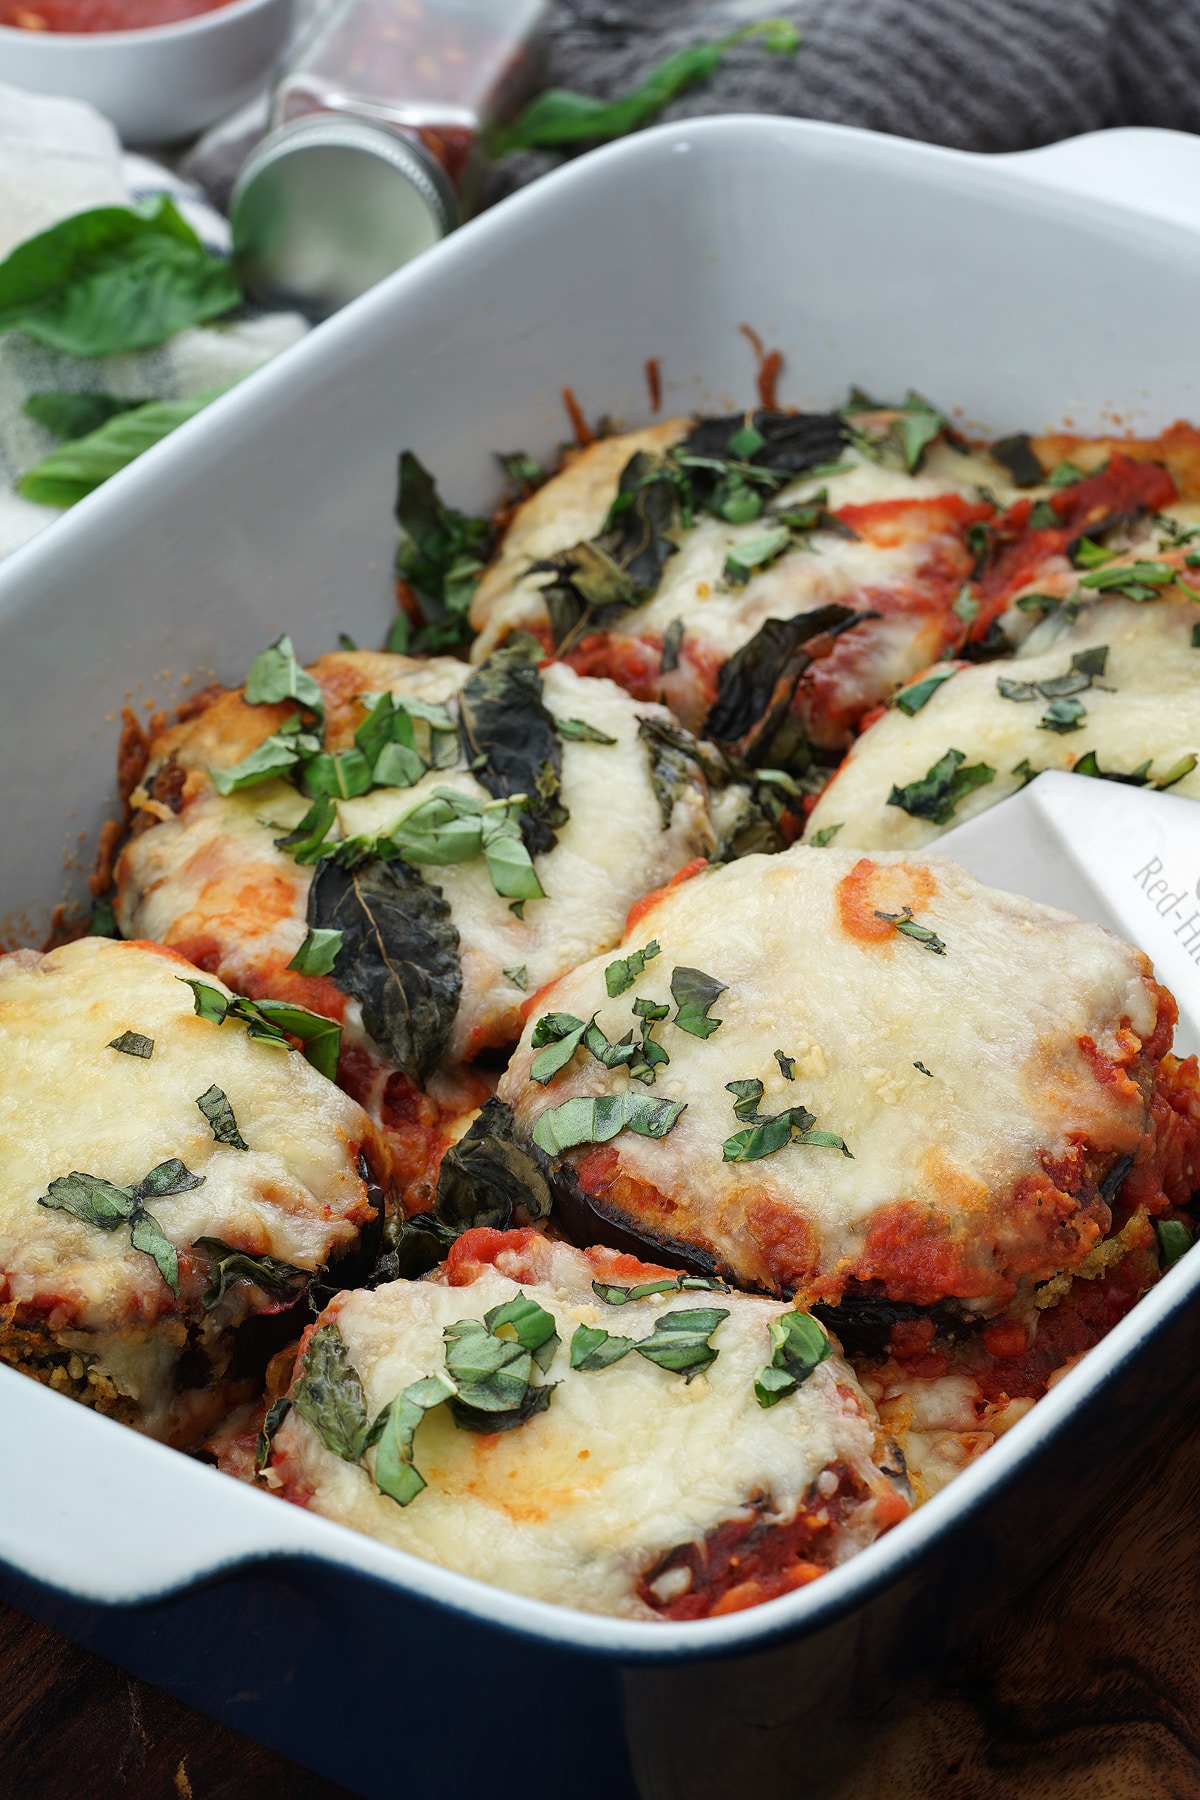 Eggplant Parmesan in a Ceramic Baking tray